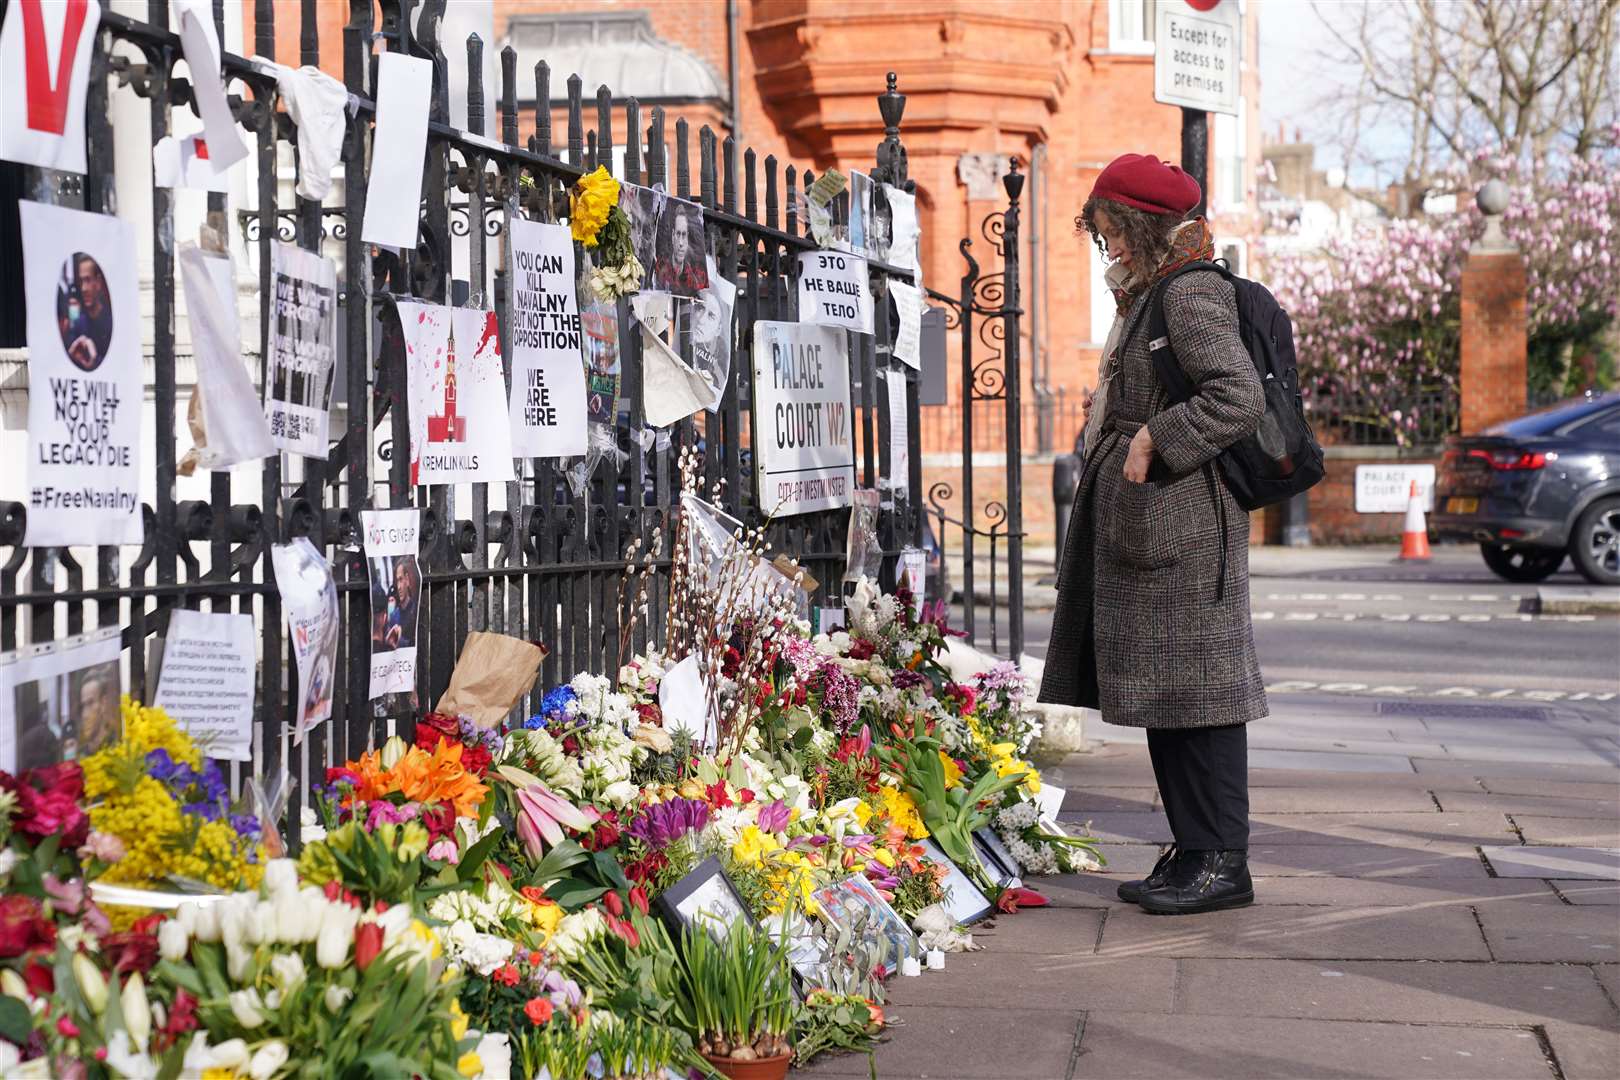 Flowers were left outside the Russian embassy in London on the day of the funeral of Vladimir Putin’s opponent Alexei Navalny (Lucy North/PA)